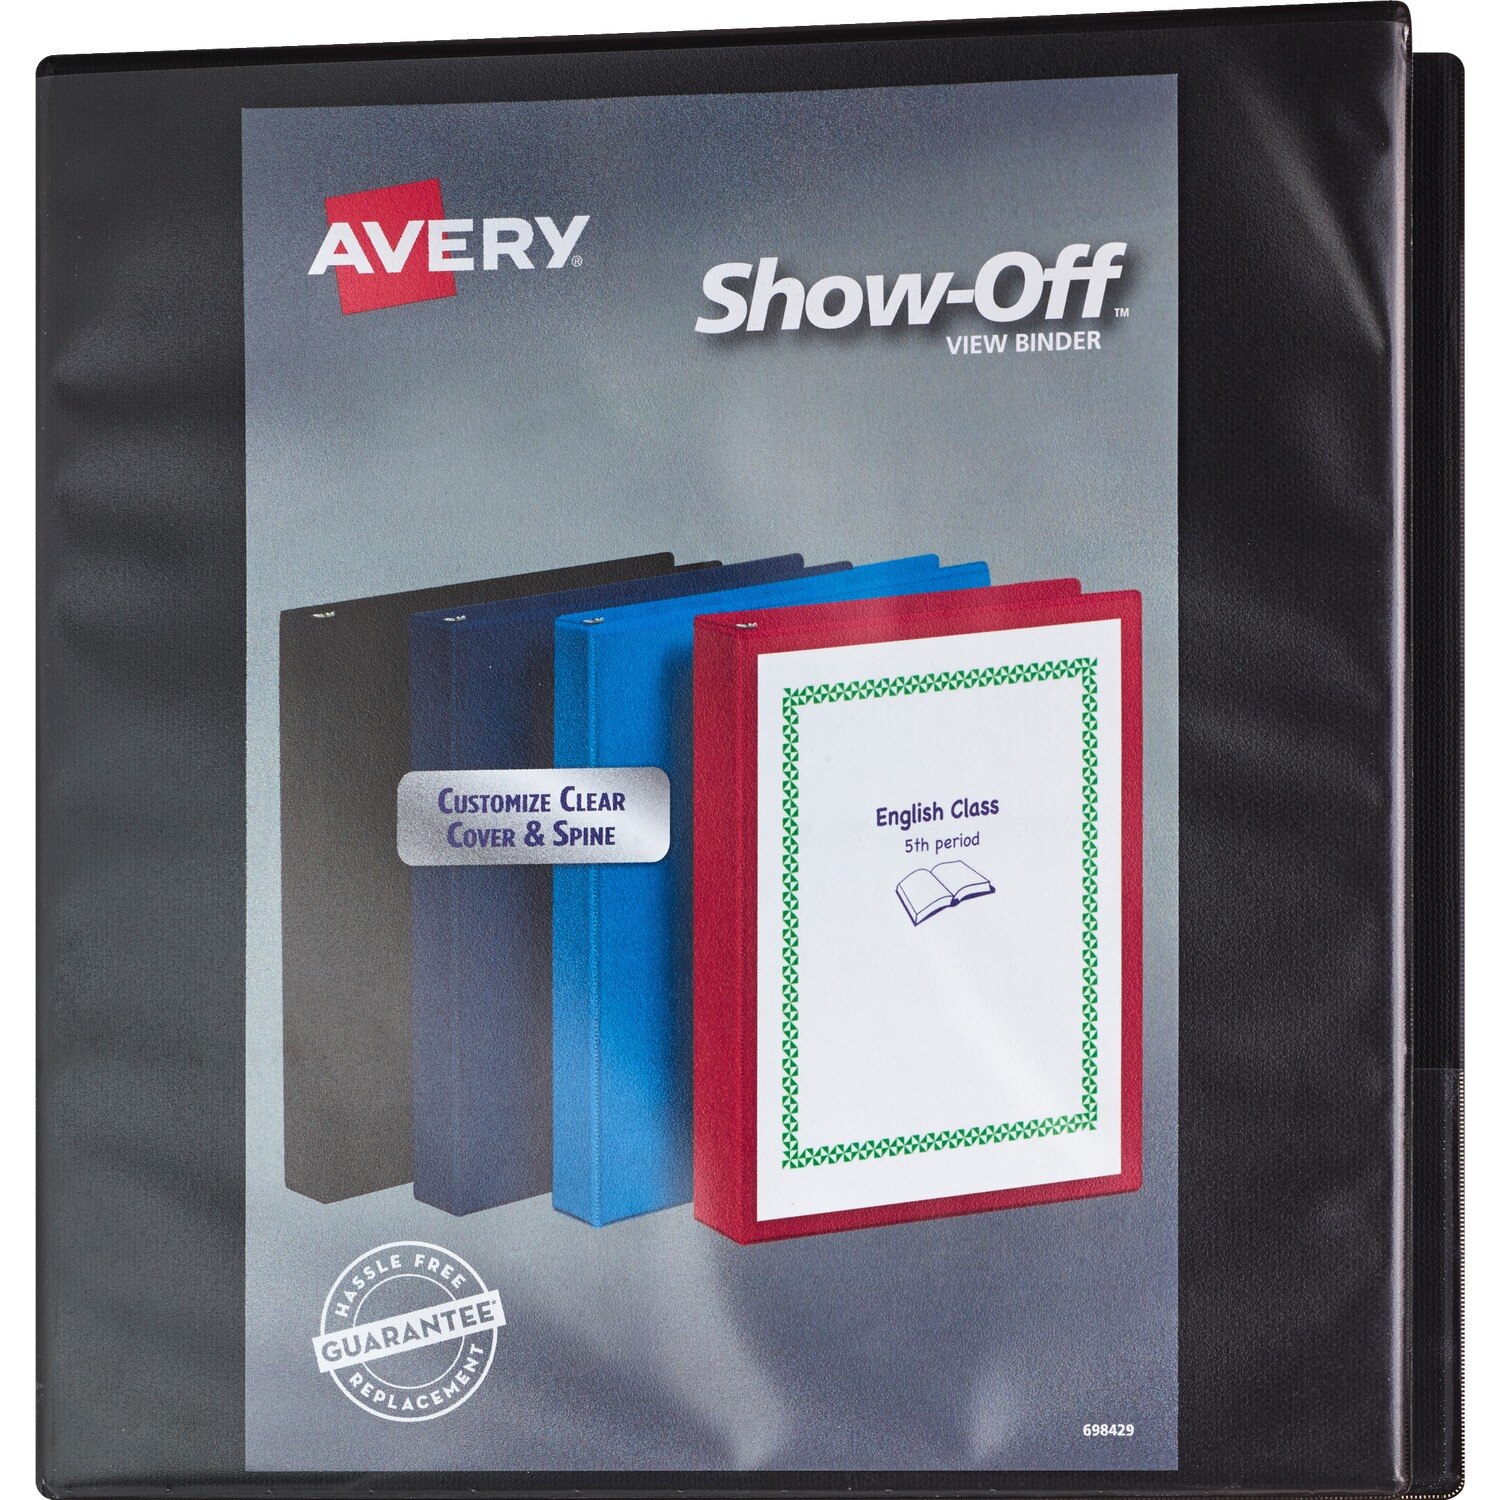 Avery Show-Off View Binder